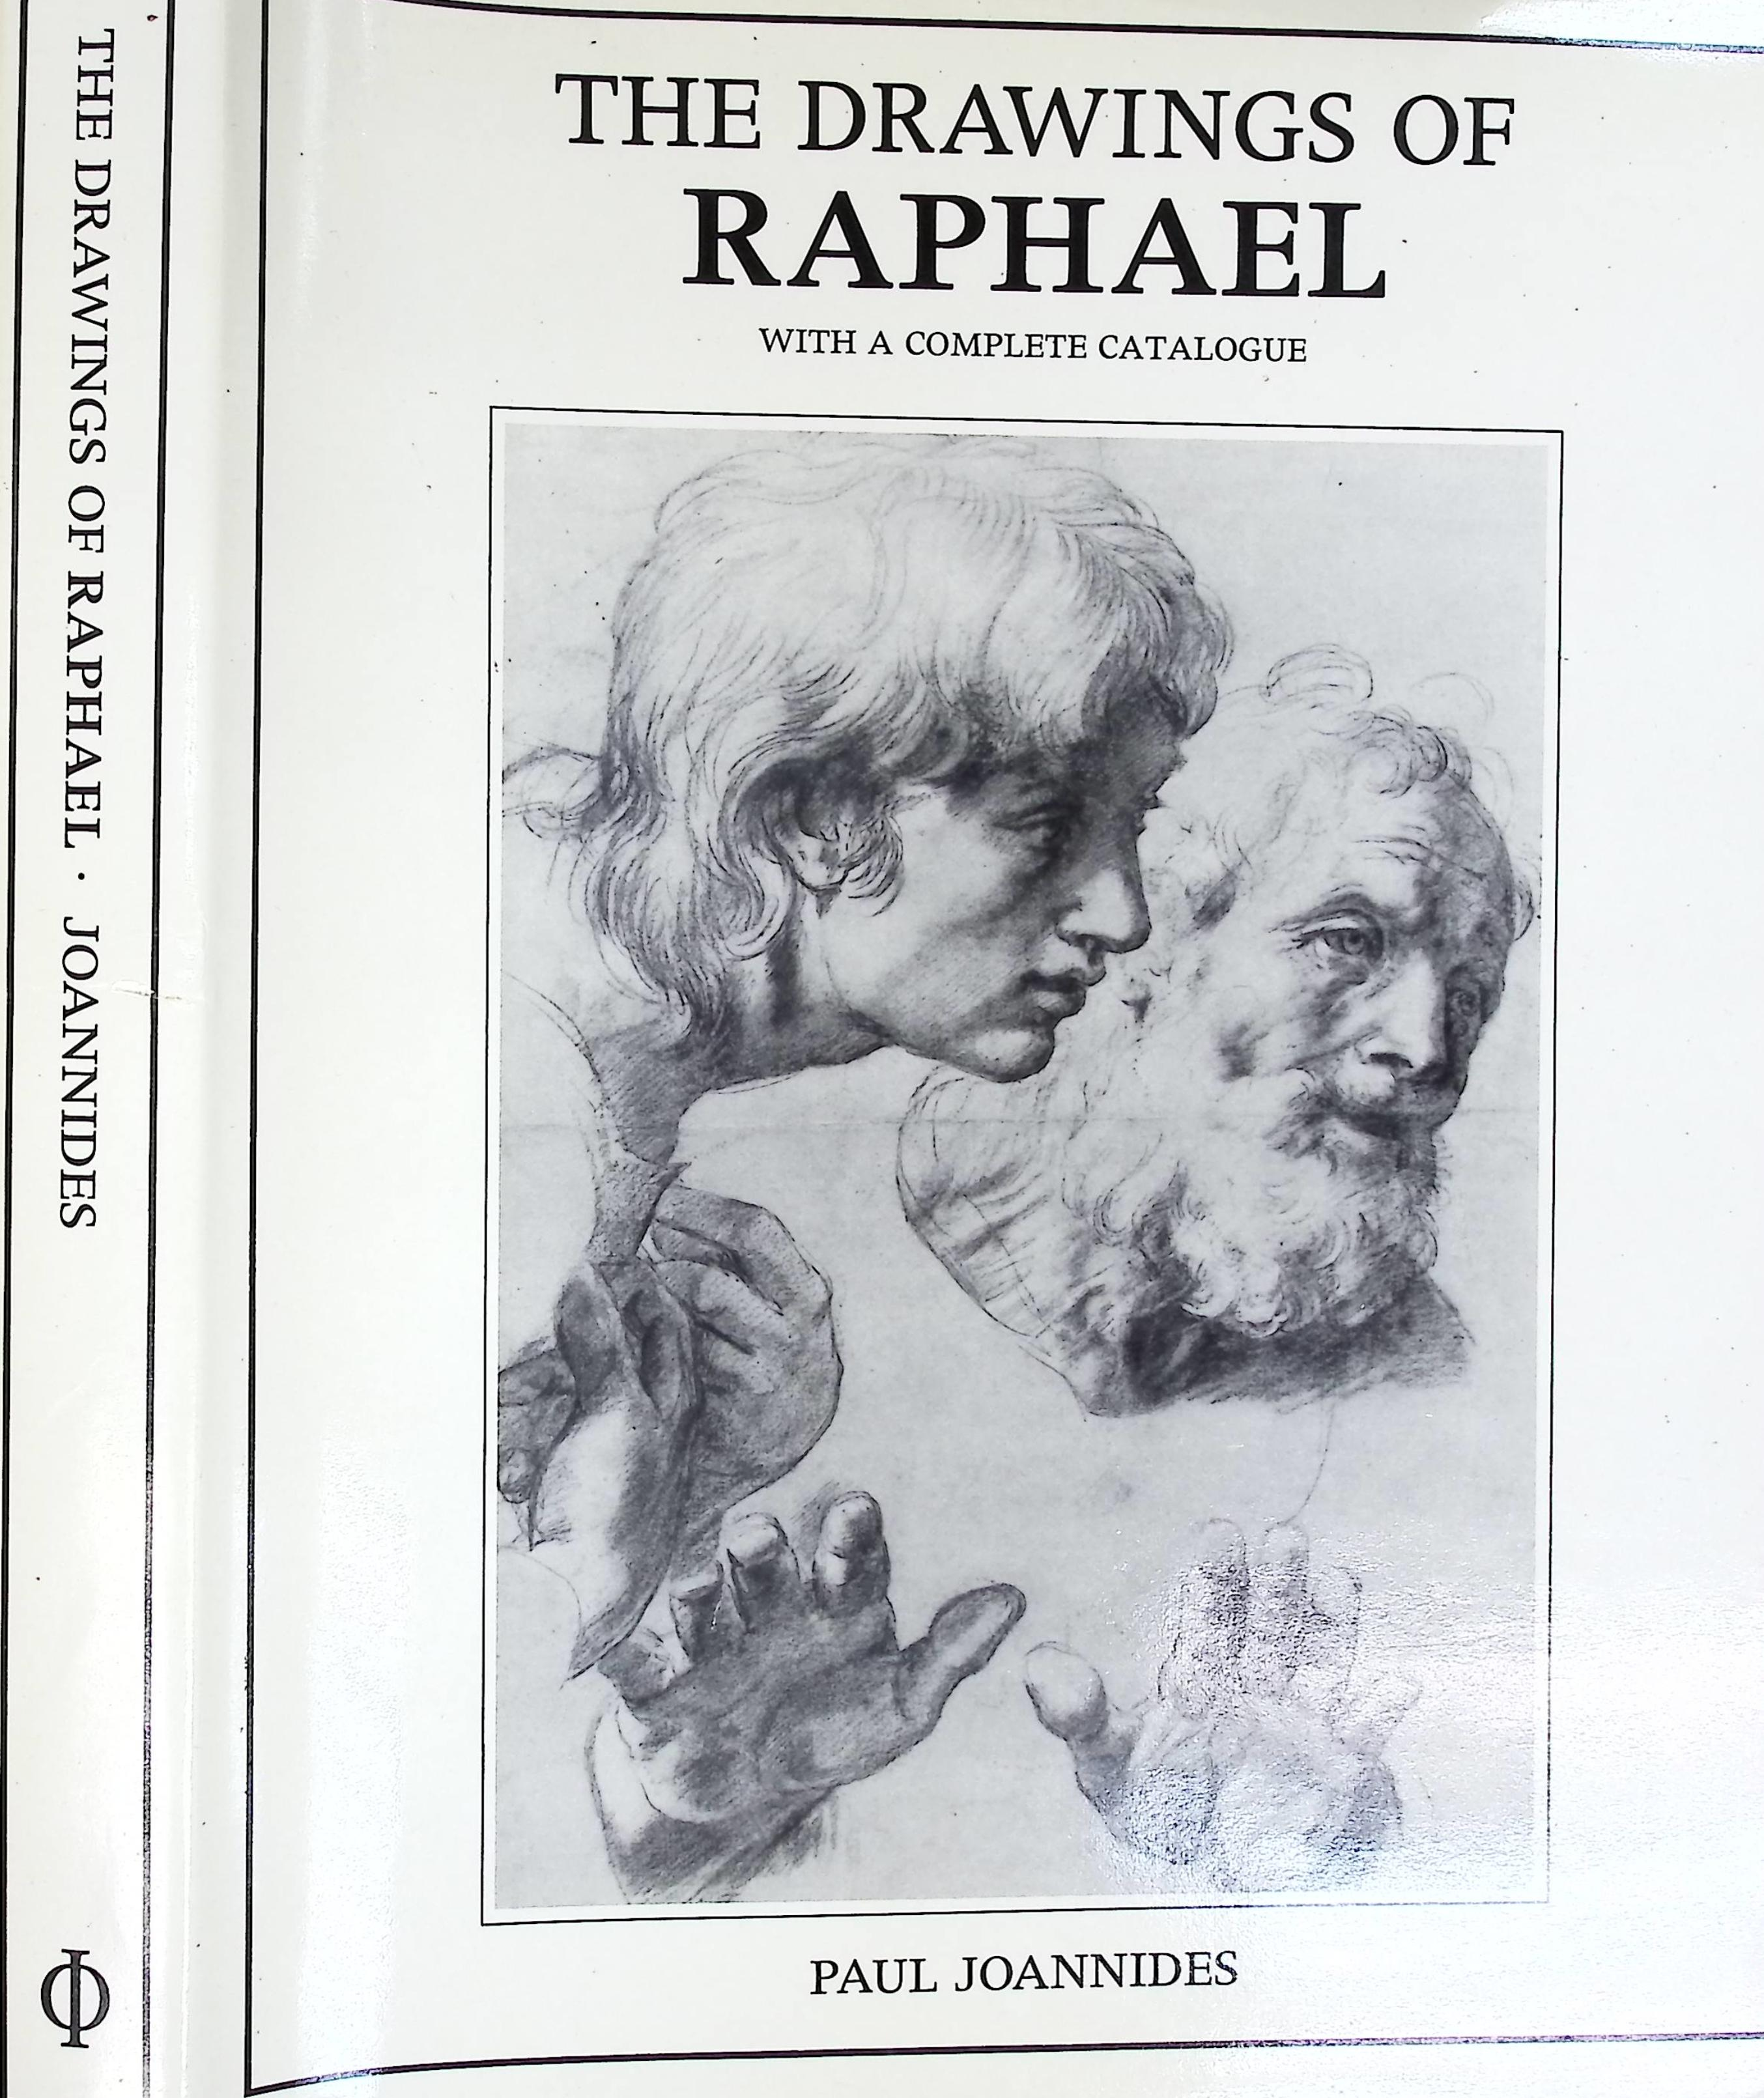 The Drawings of Raphael with a Complete Catalogue